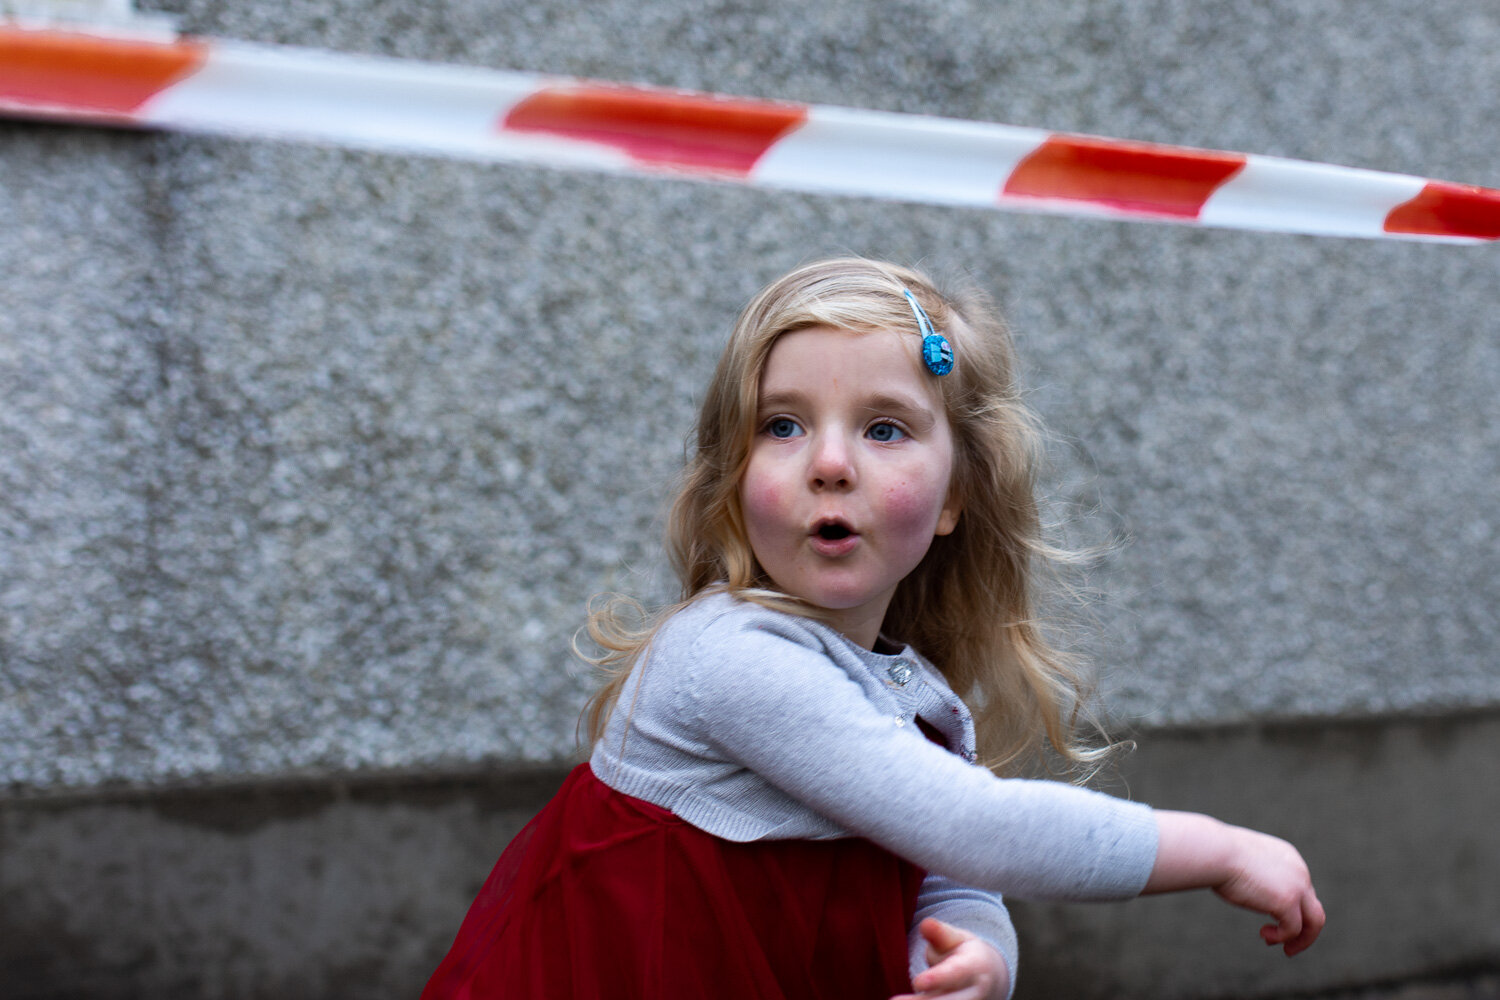 toddler girl wearing red and white standing under red white tape playing